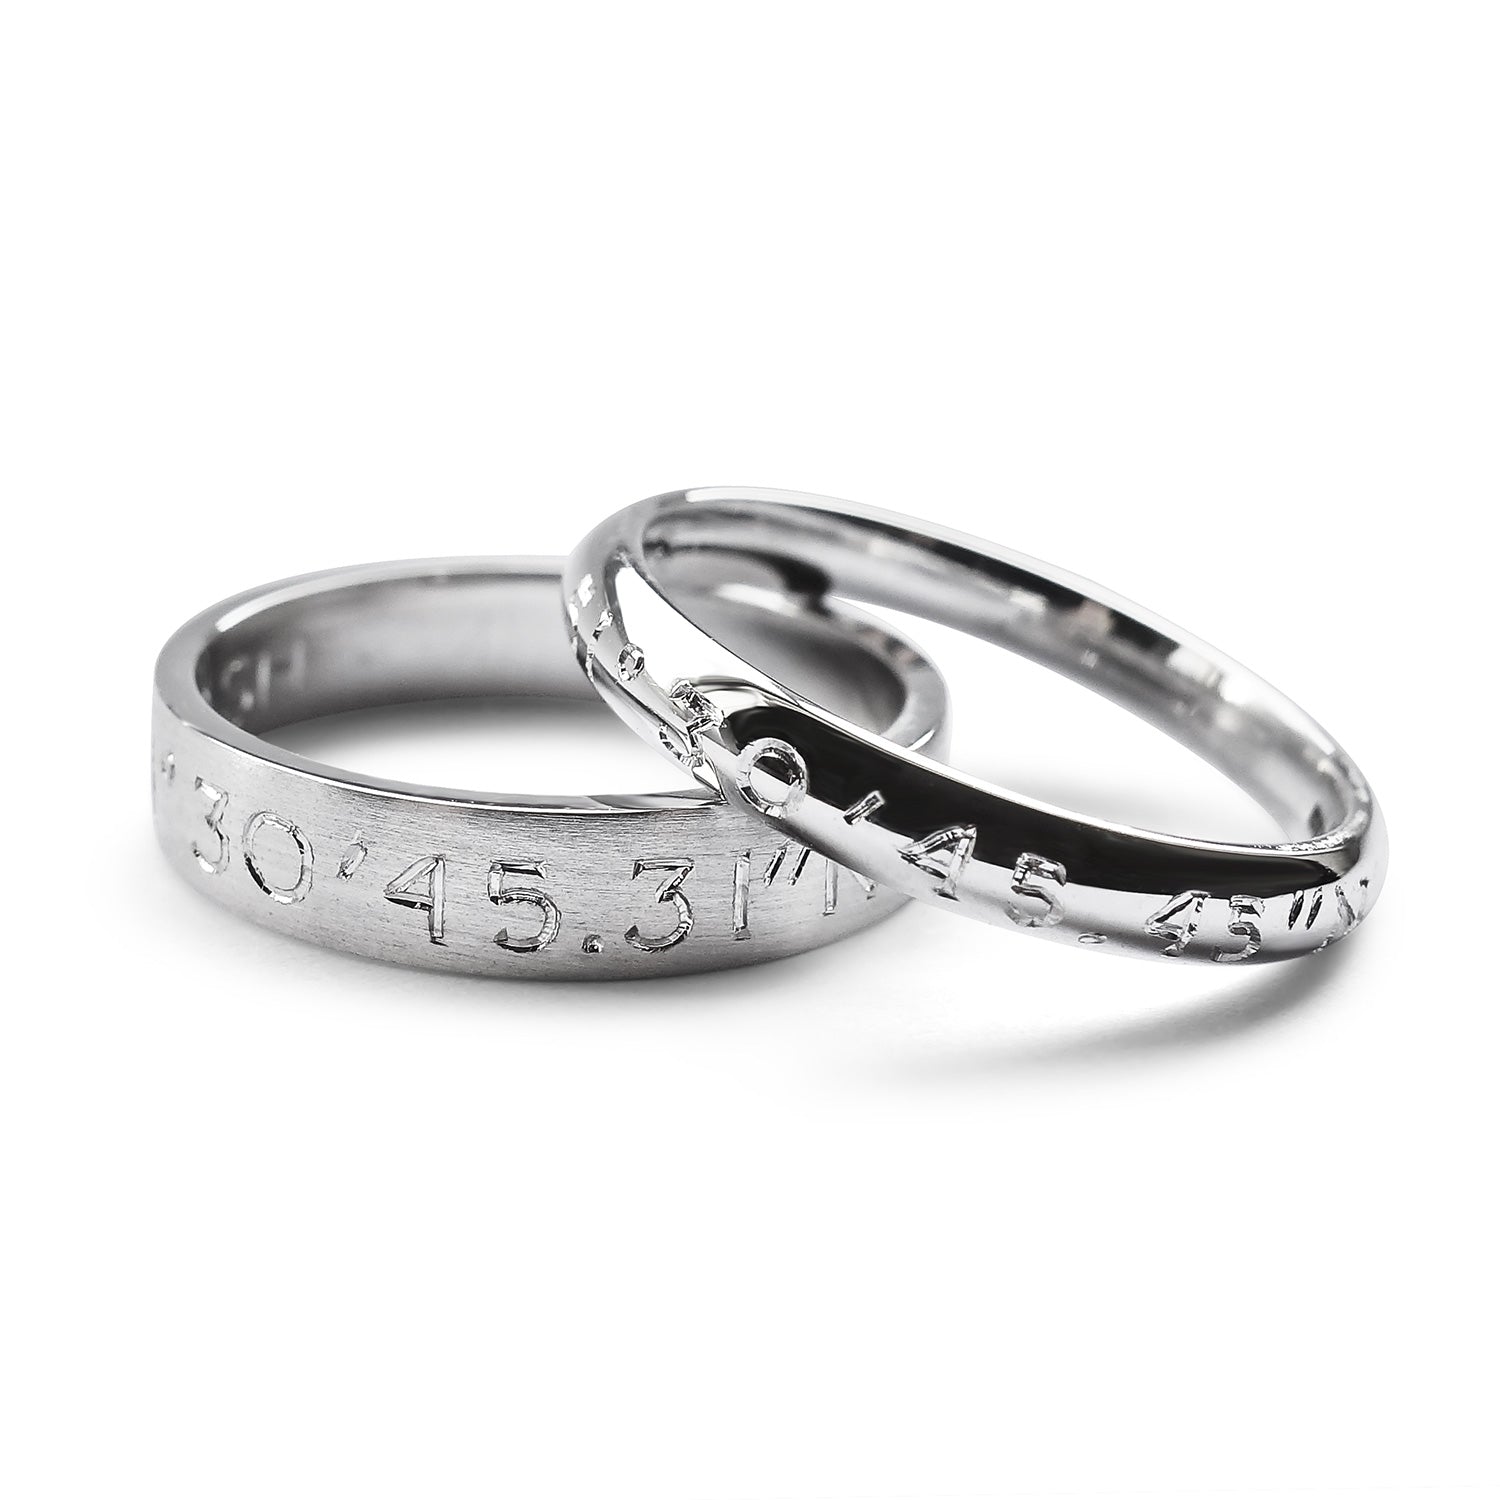 100% recycled platinum commitment rings, laser-inscribed with geographical coordinates. Engraved wedding bands for him and her